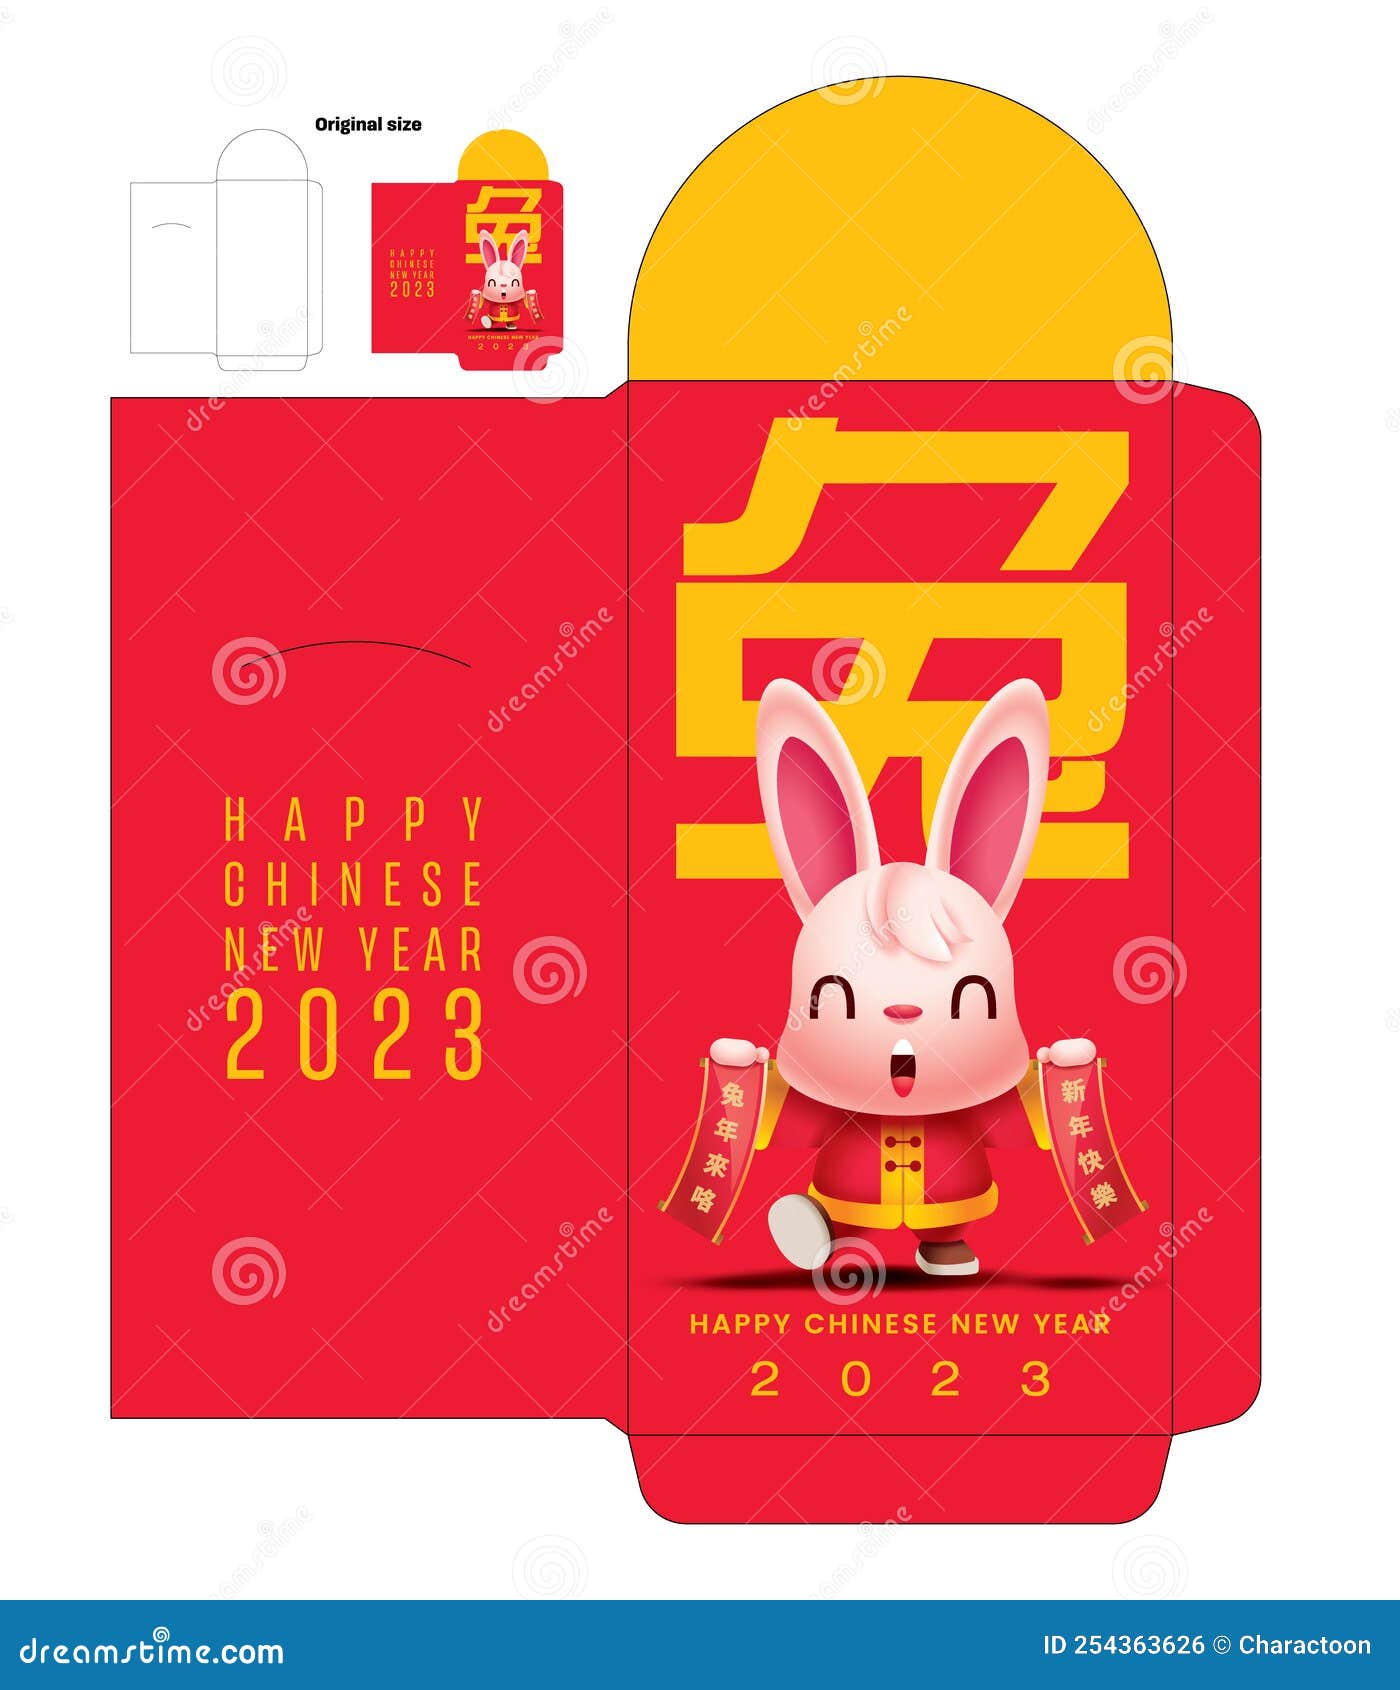 Happy chinese new year 2023 Template